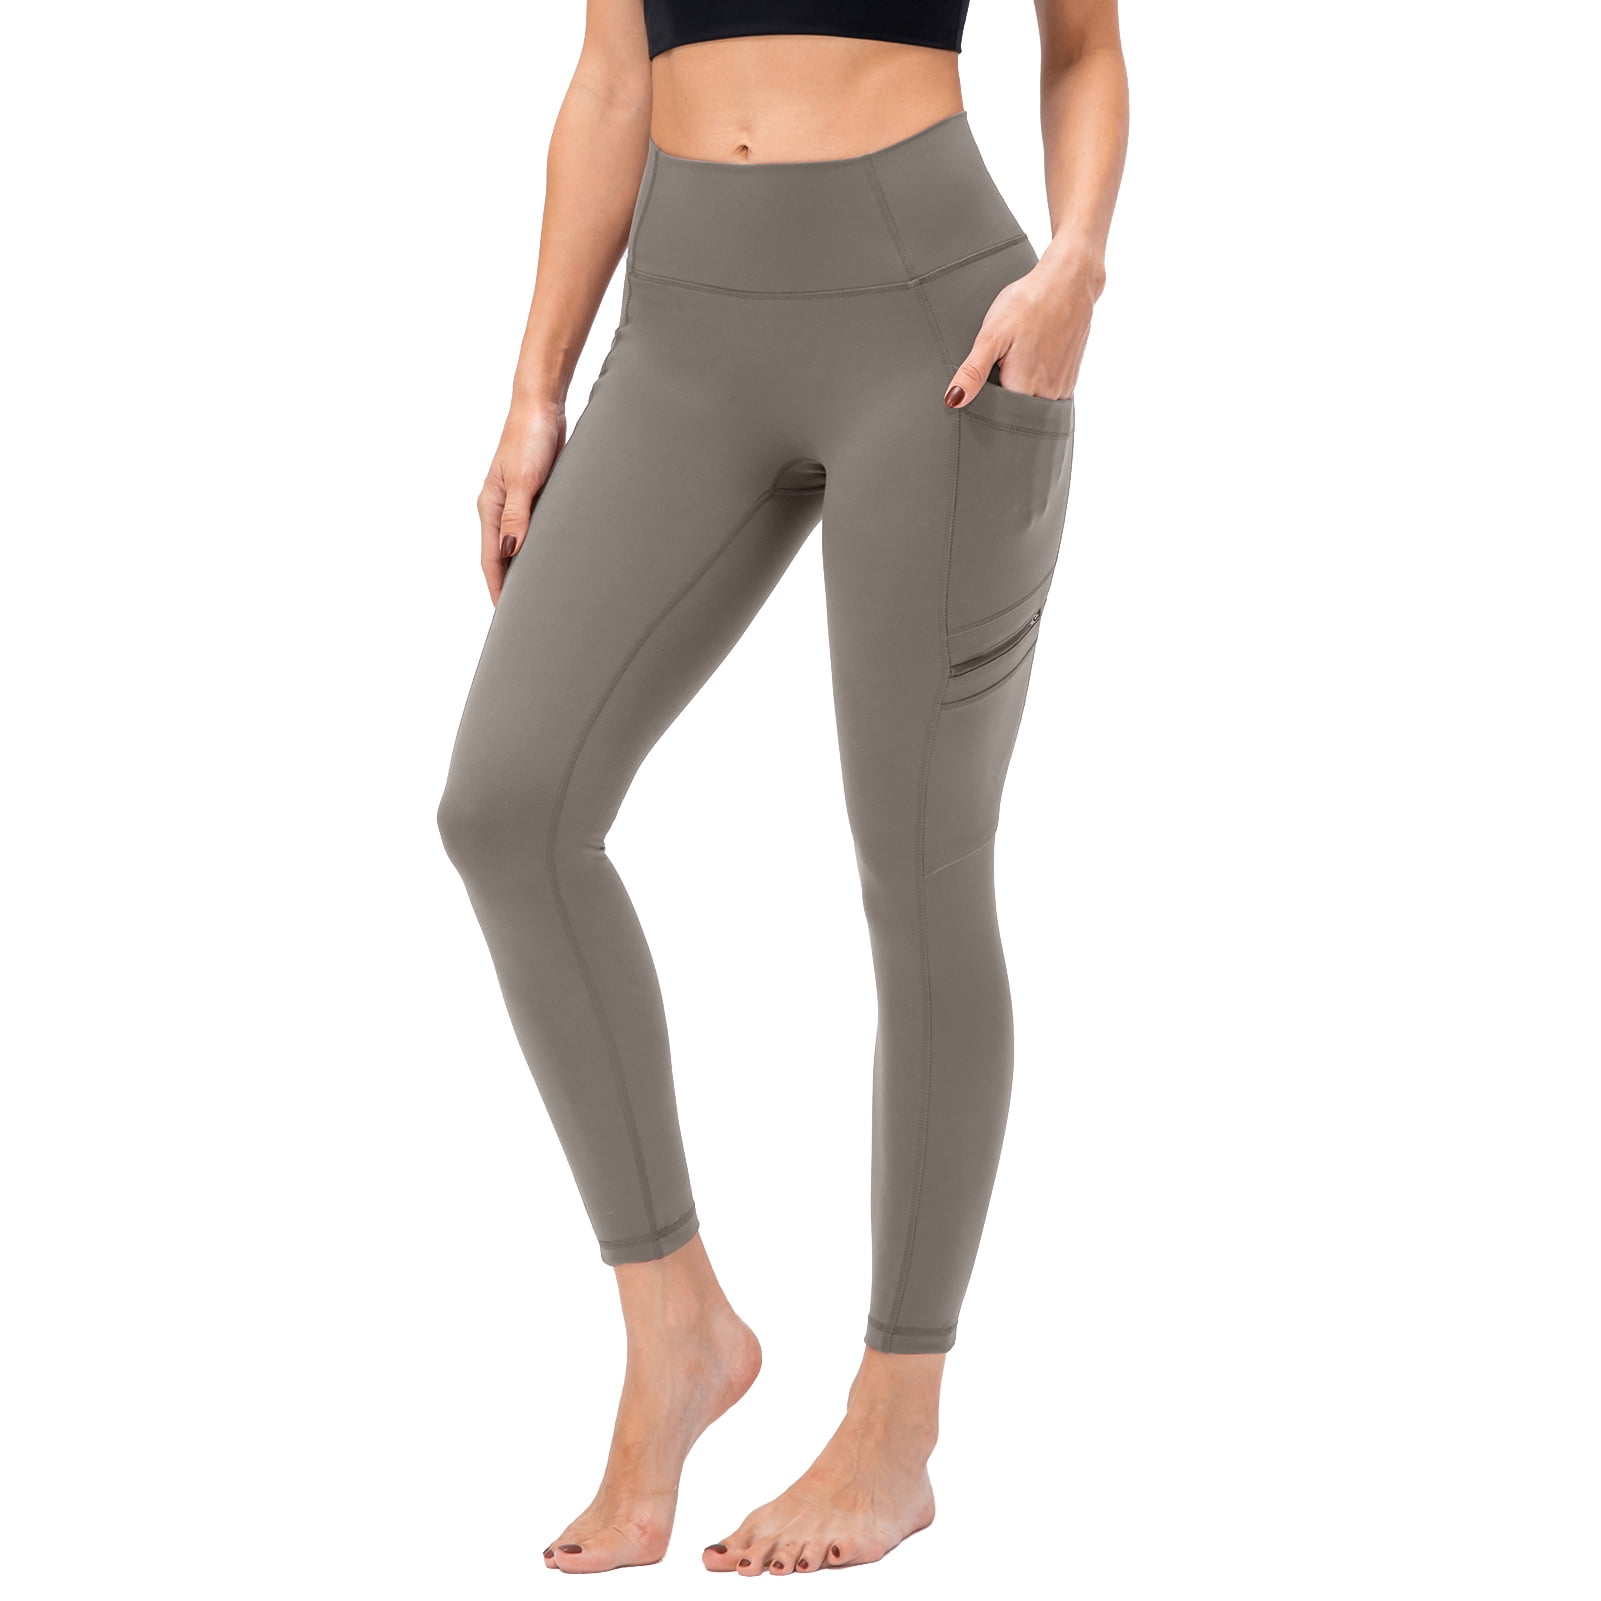 TOMSHOO Yoga Pants Sports Trousers Leggings With Pockets High Waisted Elasticity Gym Tights & Leggings Running For Women